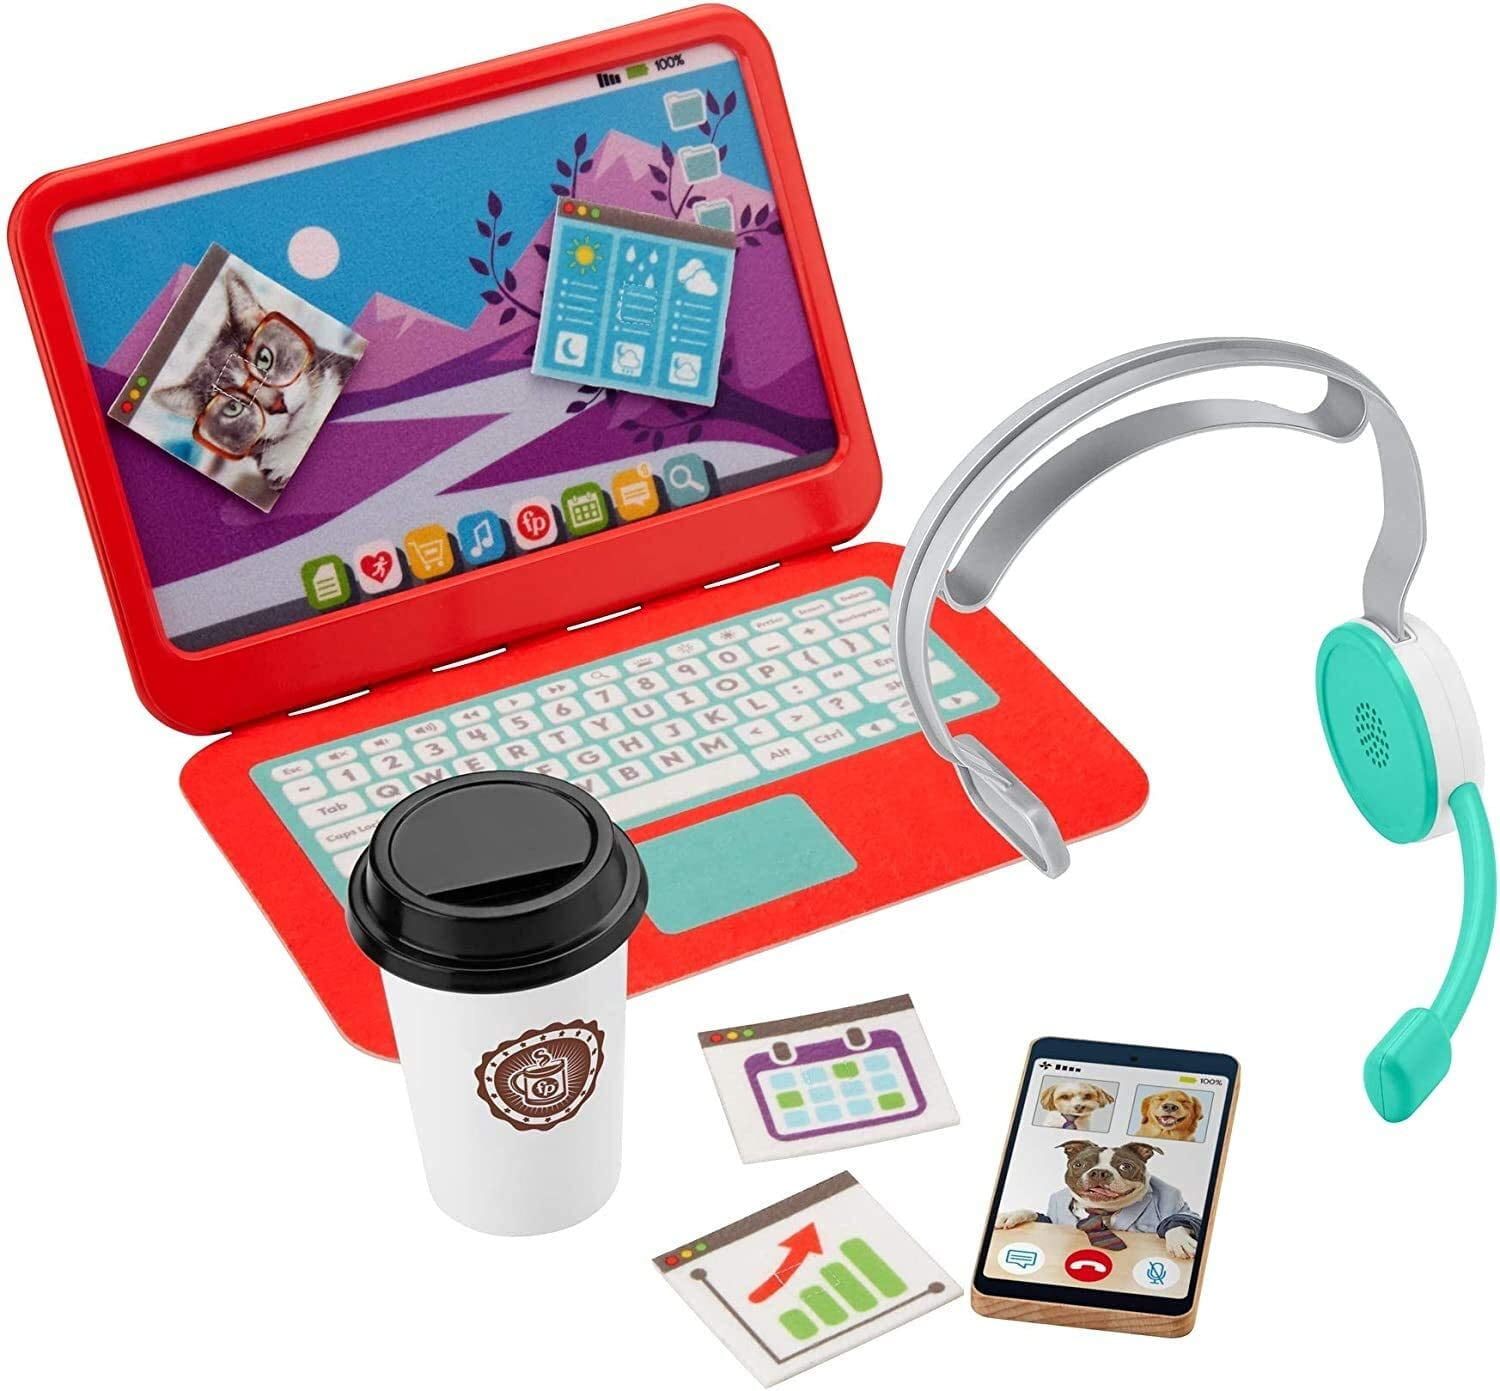 ashley rebecca johnson recommends office 4 play 3 pic